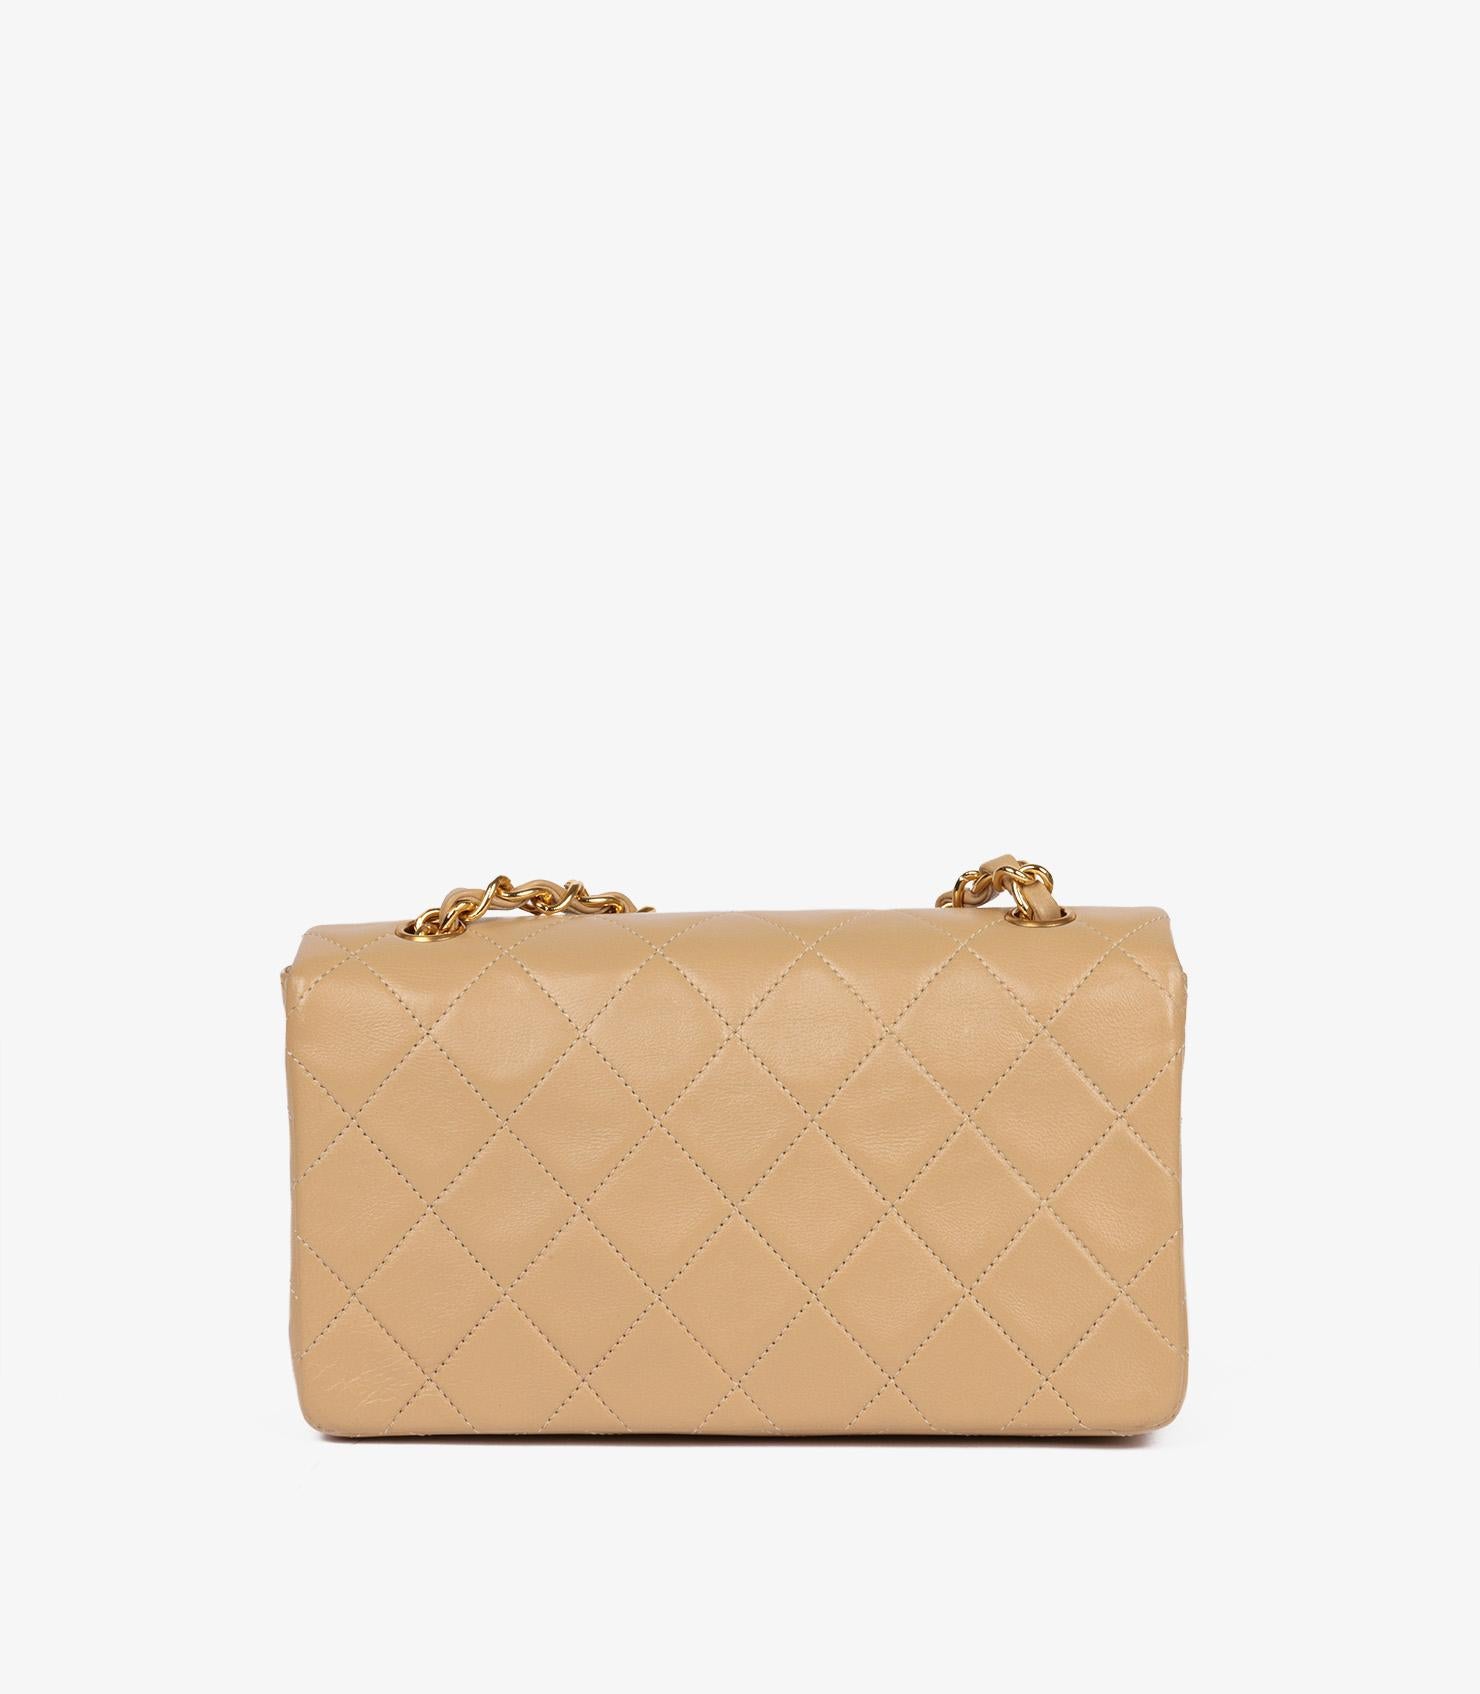 Chanel Beige Quilted Lambskin Vintage Rectangular Mini Full Flap Bag For Sale 2